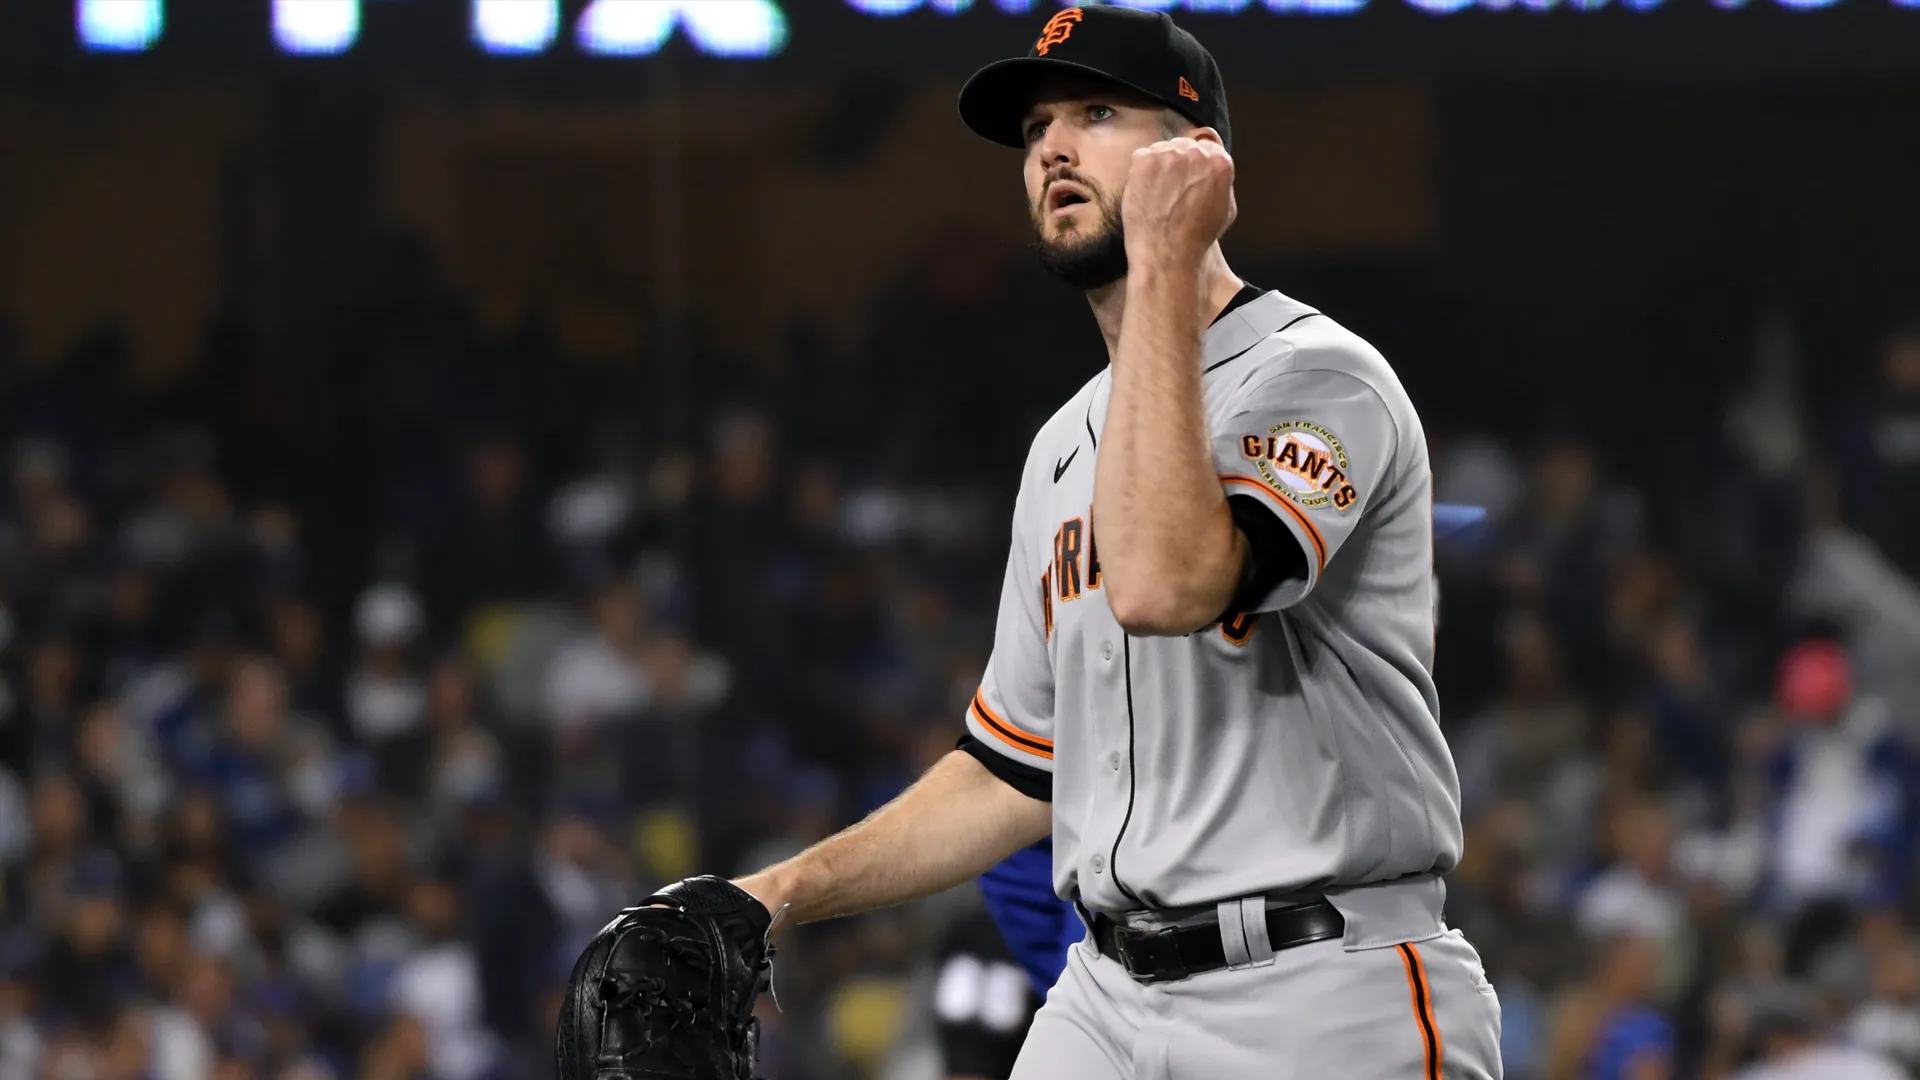 Alex Wood, Giants agree to two-year $25M contract in MLB free agency | RSN